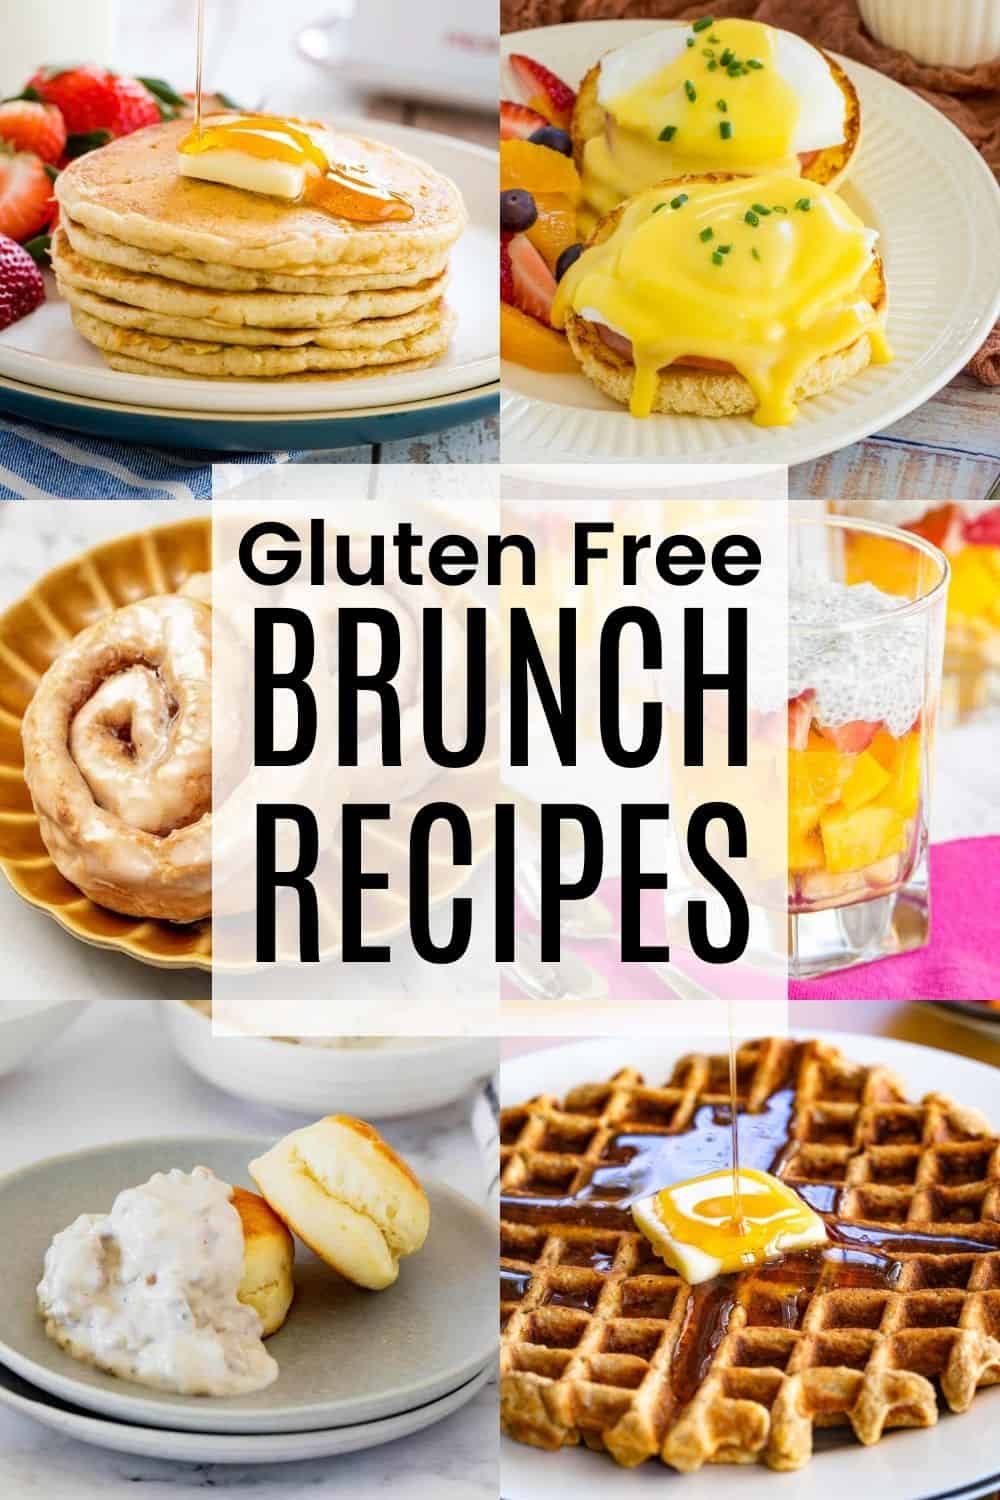 A two-by-three collage of pictures of pancakes, cinnamon rolls, a waffle, fruit salad, and more with a white box in the middle with text overlay that says "Gluten Free Brunch Recipes".